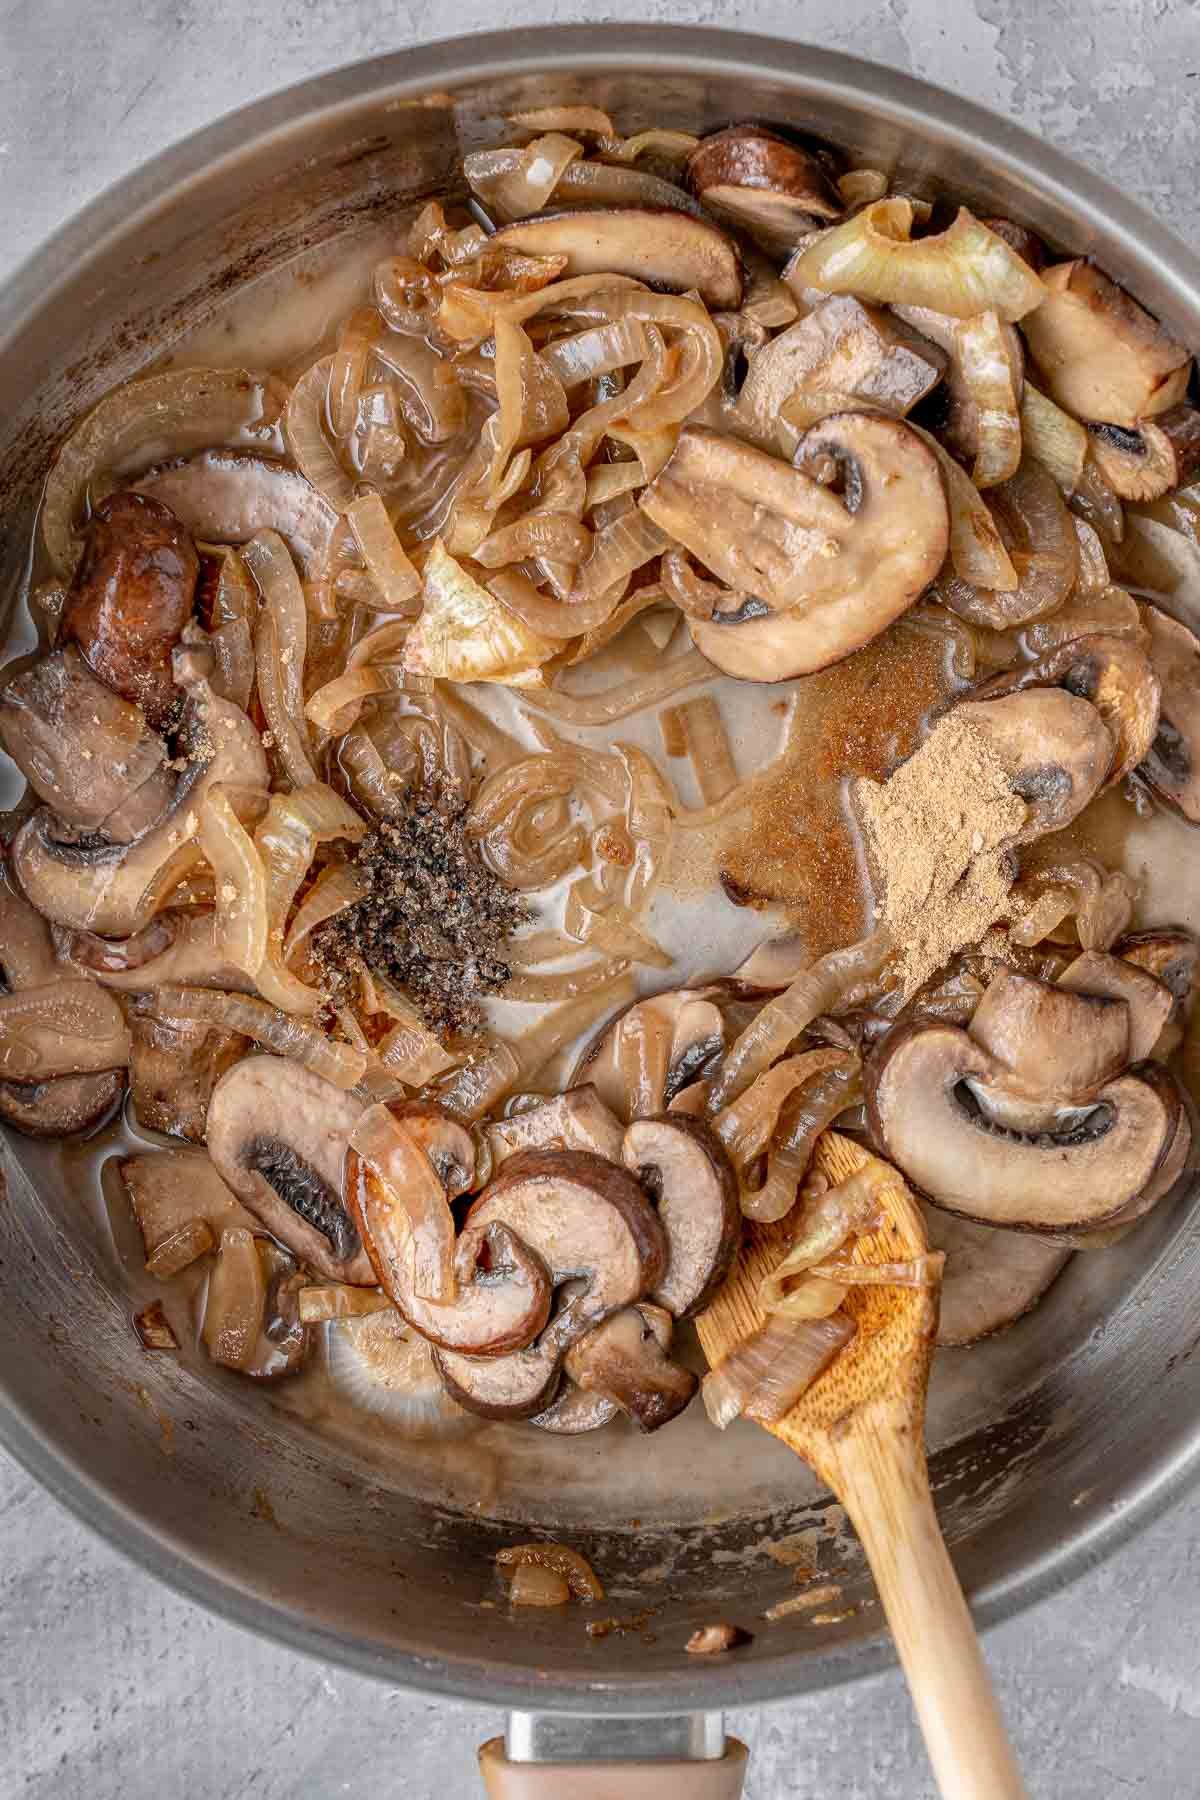 Sautéed mushrooms and onions in a pan with a wooden spoon.